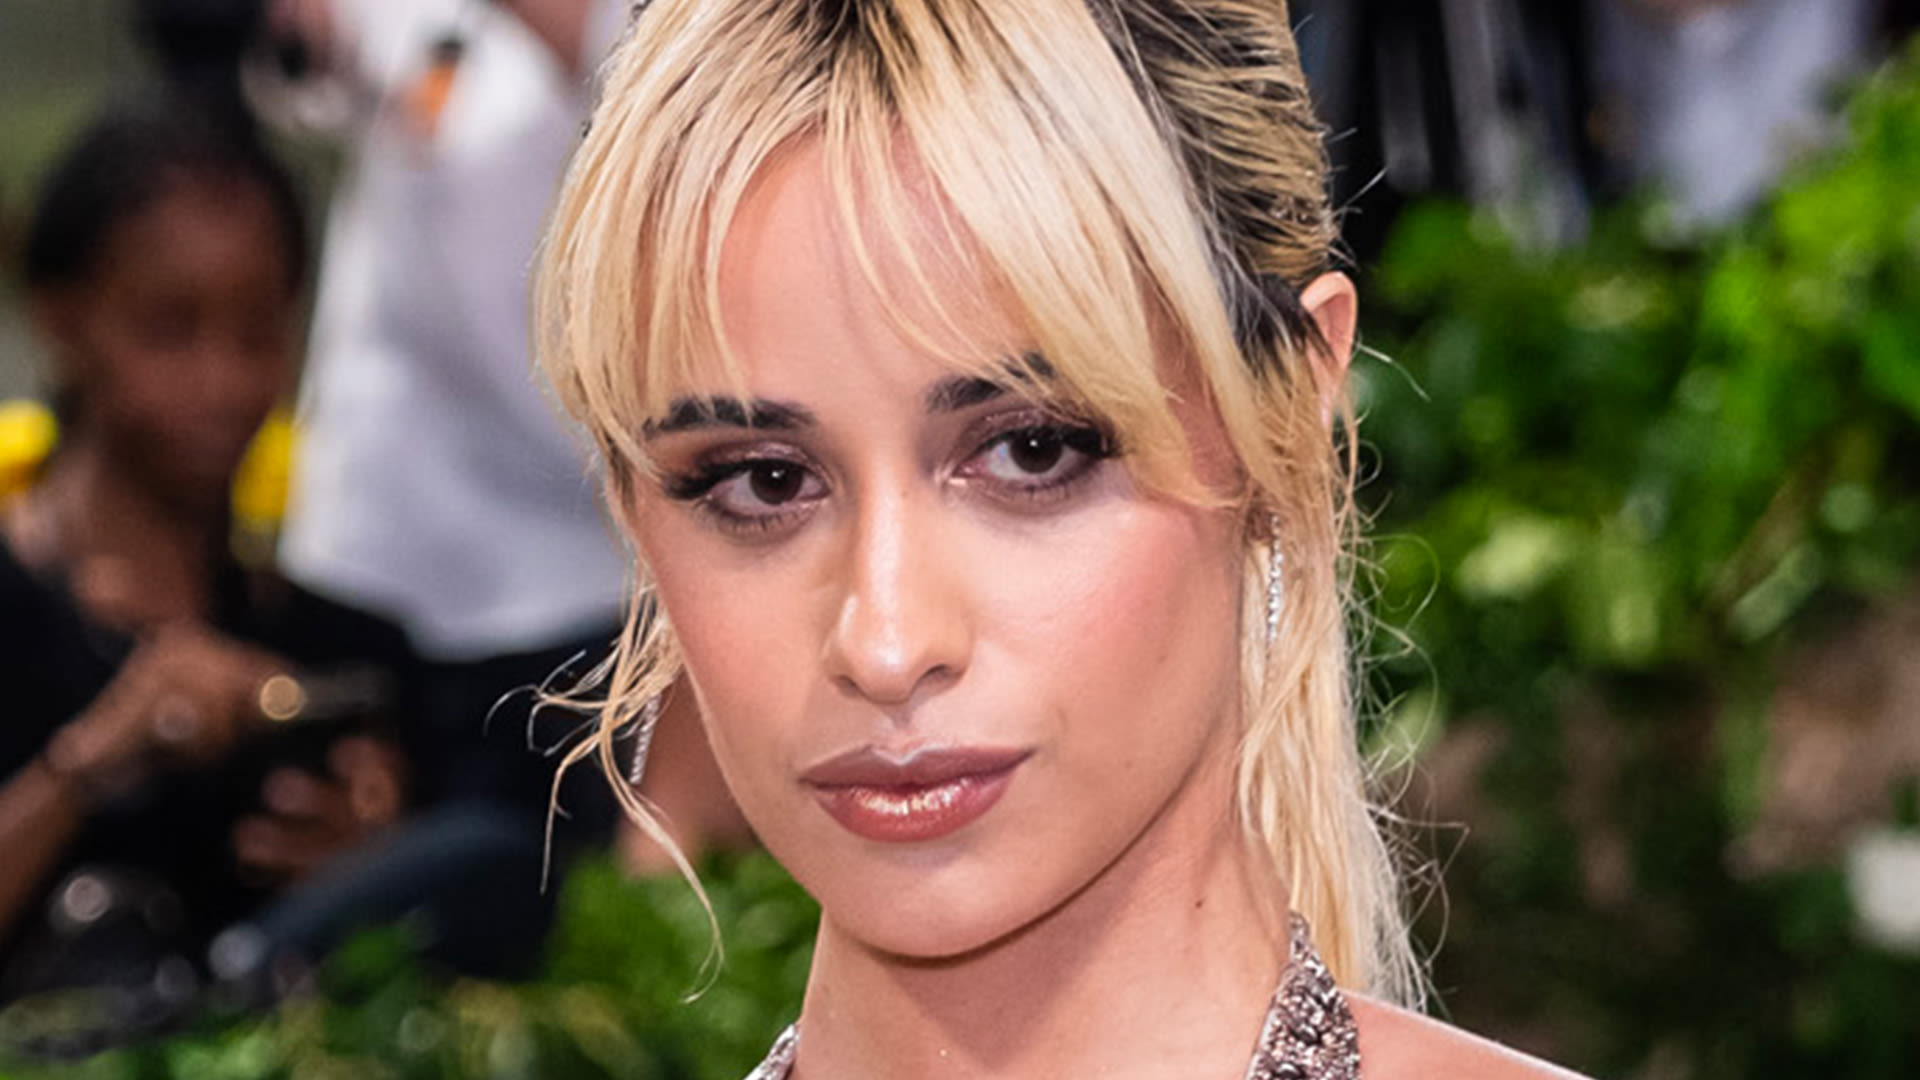 Camila Cabello shocks with joke about Doja Cat's Met Gala look, then apologizes